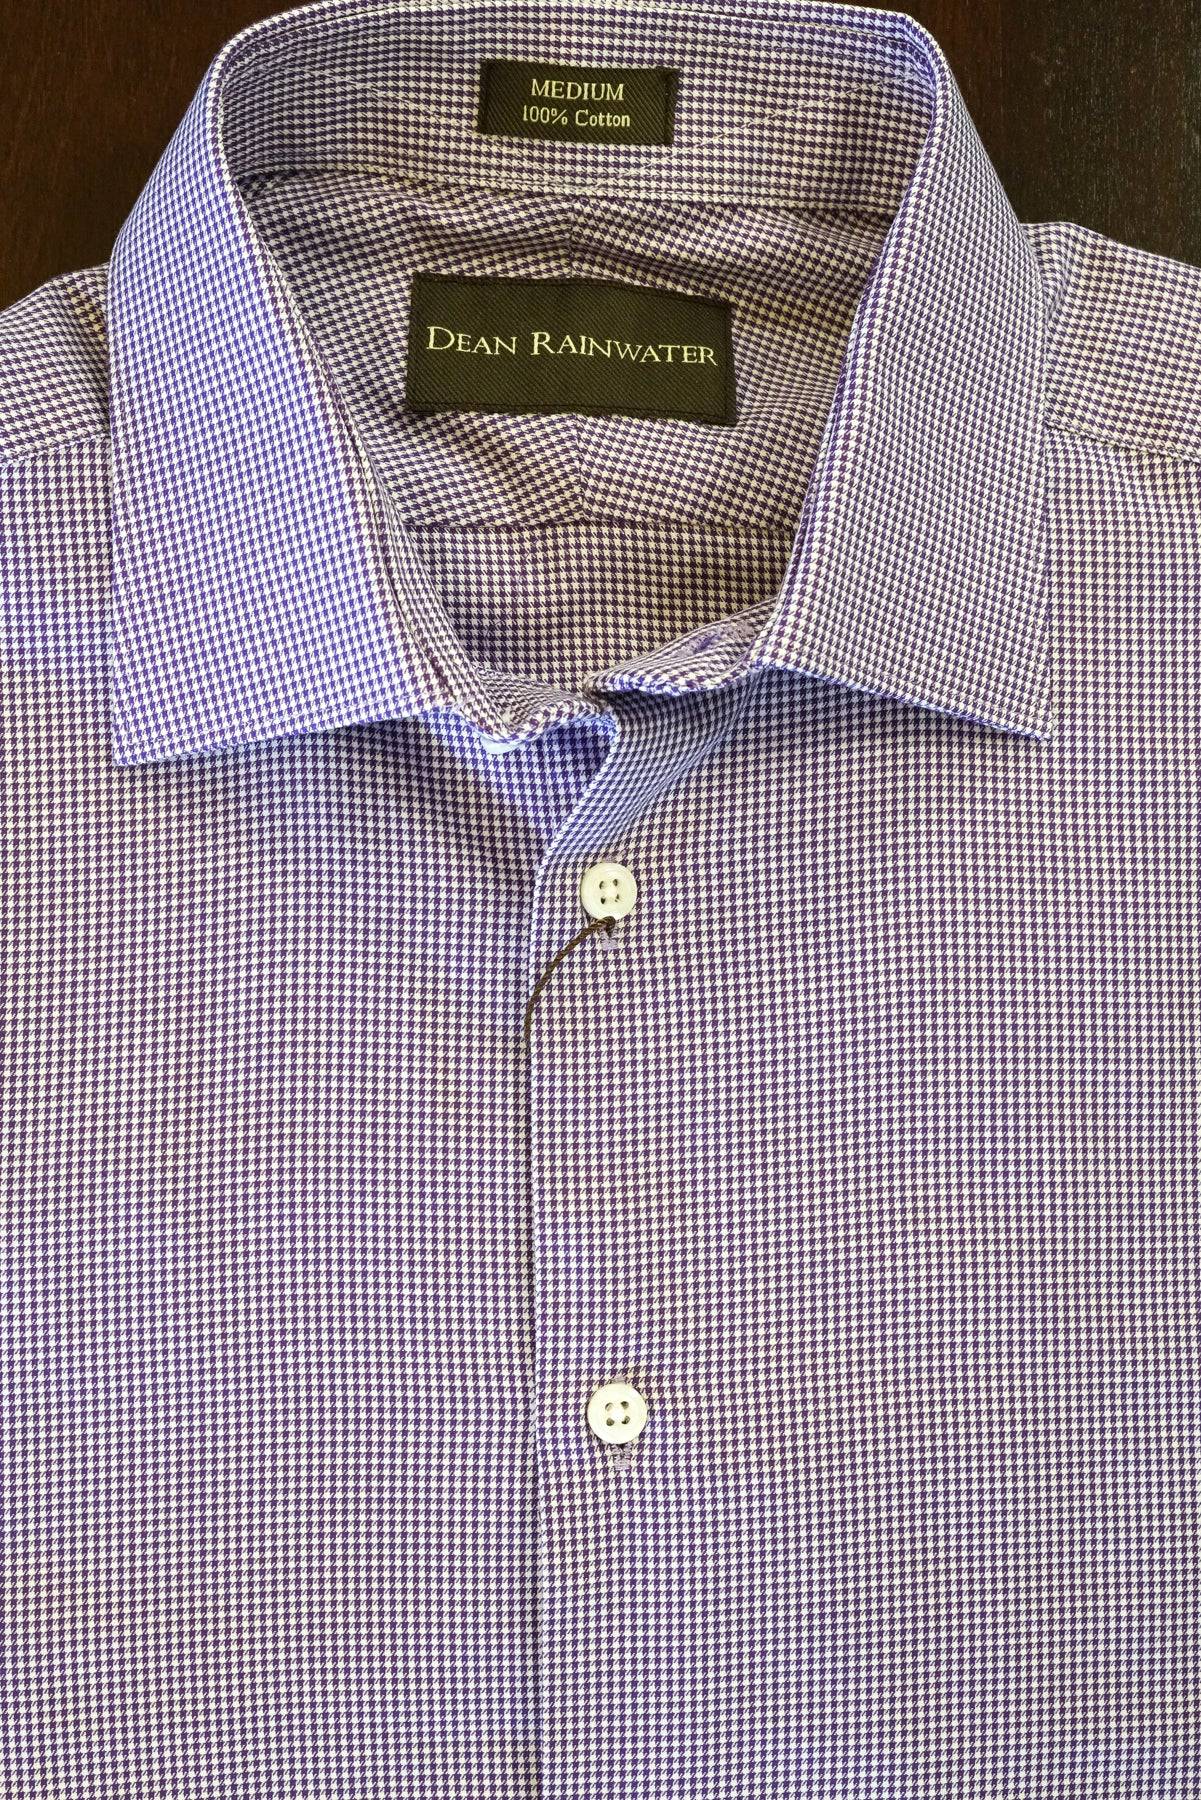 Purple Tiny Houndstooth Cotton Spread Collar by Dean Rainwater - Rainwater's Men's Clothing and Tuxedo Rental